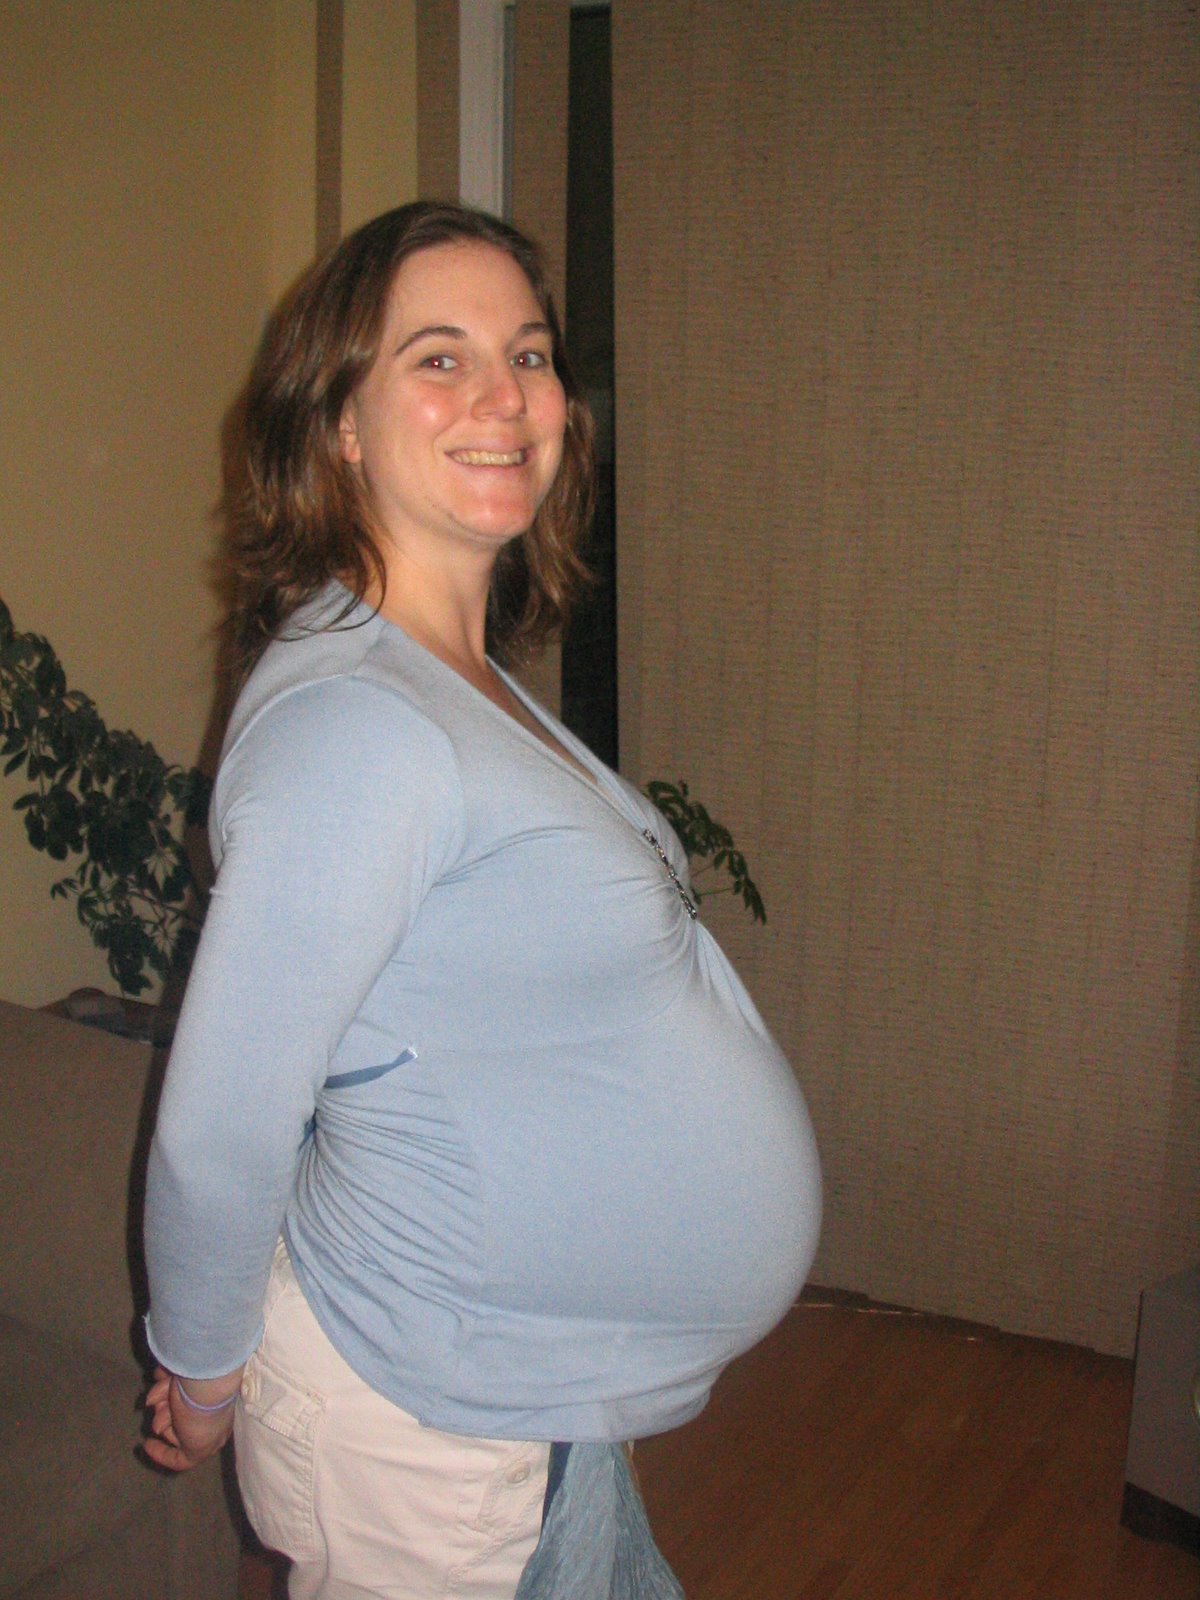 Then: Picture taken on Feb. 12...my due date.